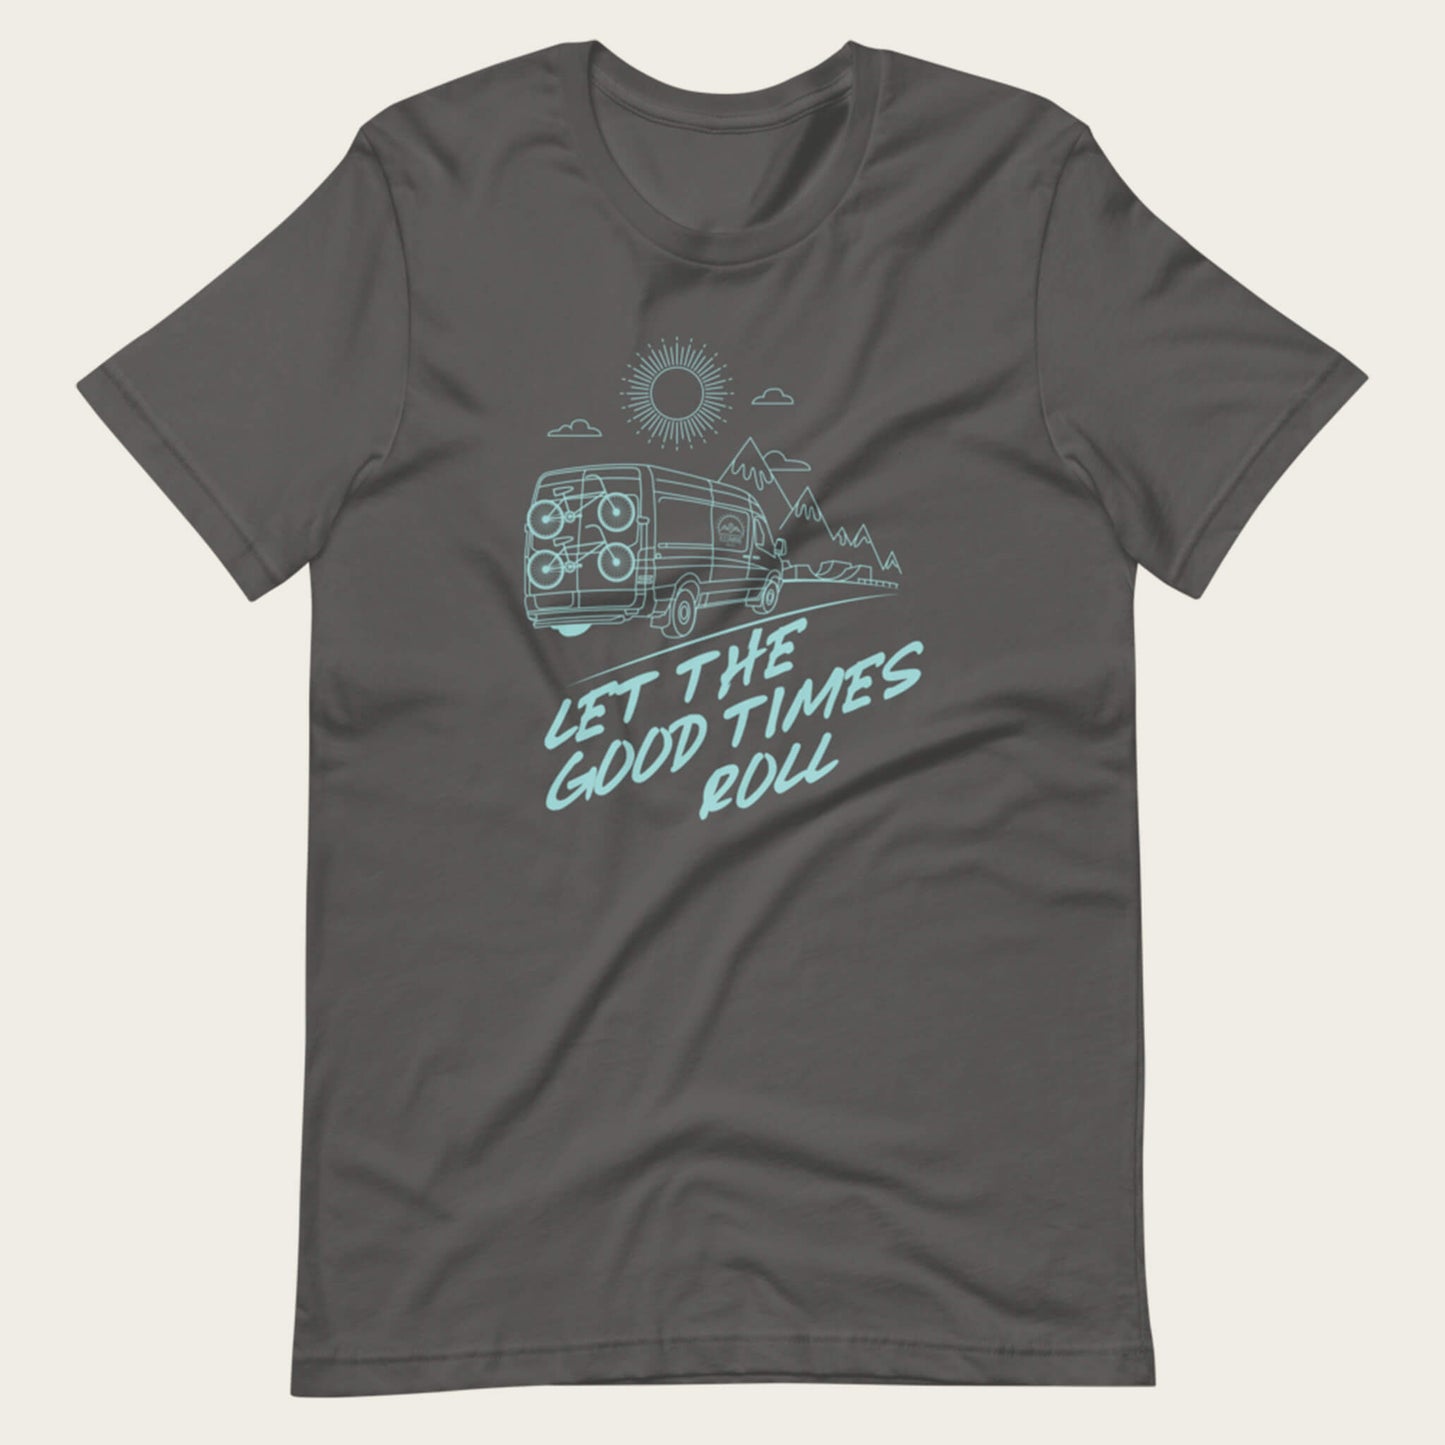 Let The Good Times Roll Tee - Storm Grey